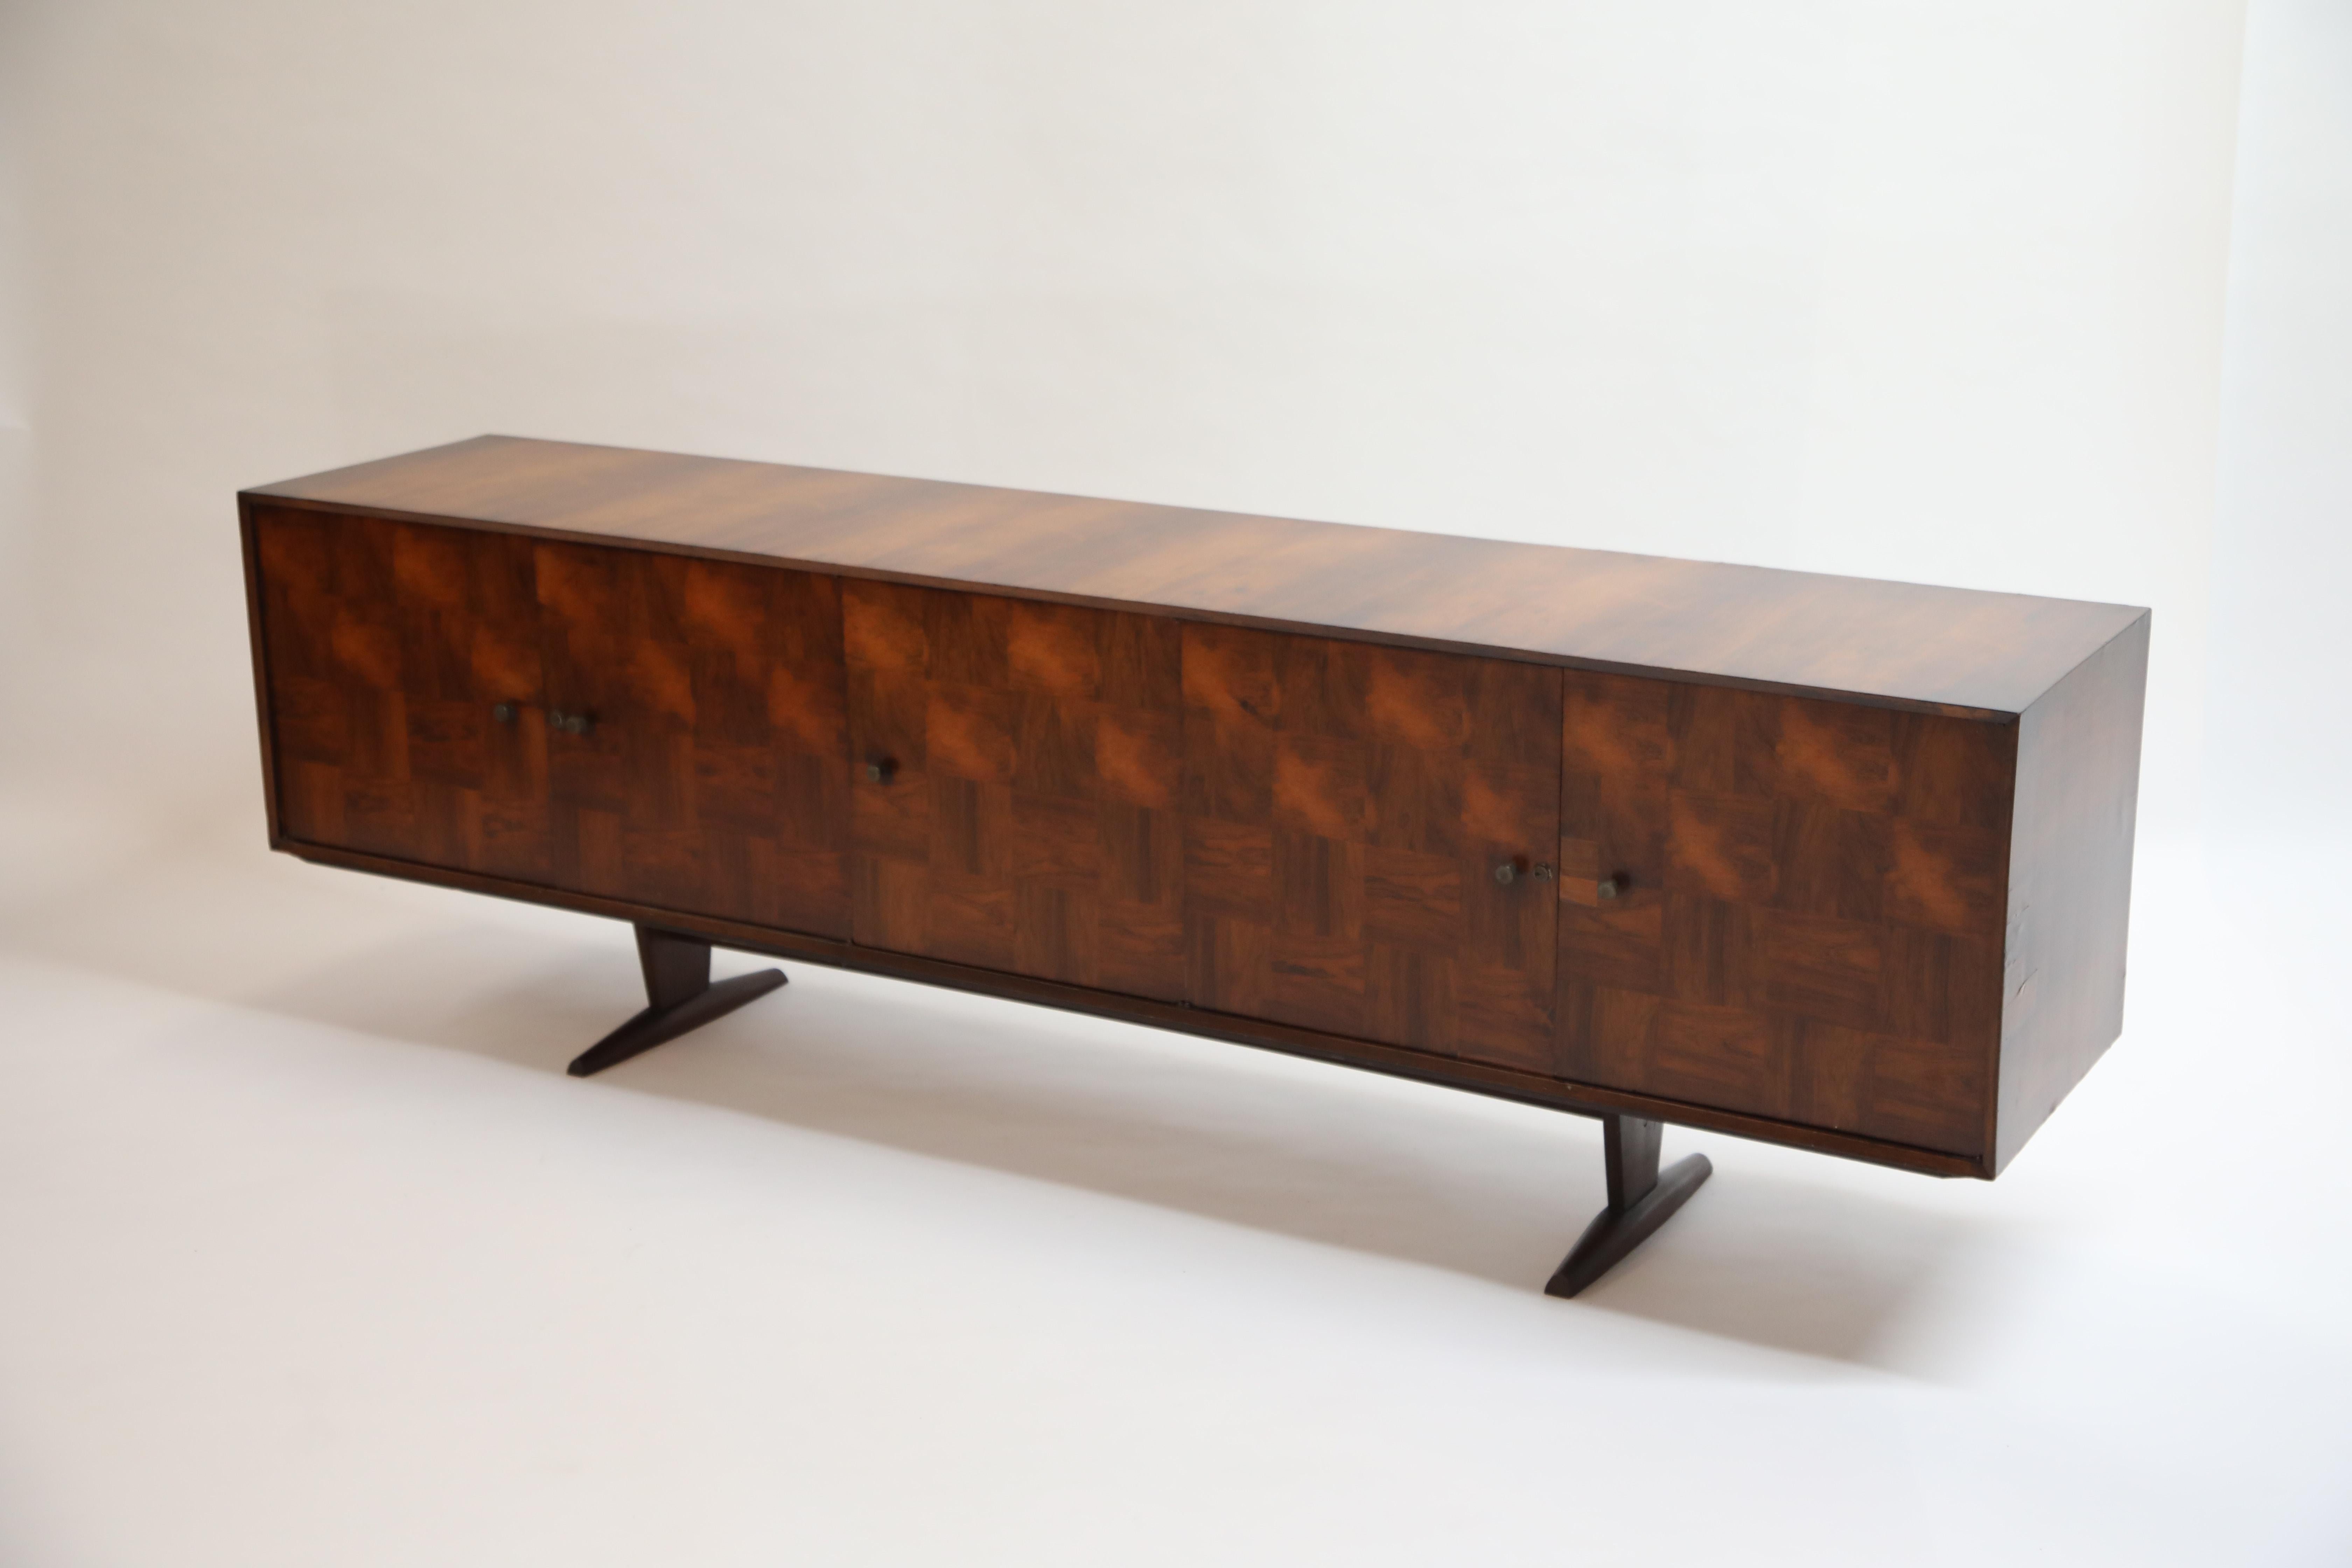 Brazilian Jacaranda Rosewood Parquetry Sideboard by Giuseppe Scapinelli, 1960s (Mitte des 20. Jahrhunderts)